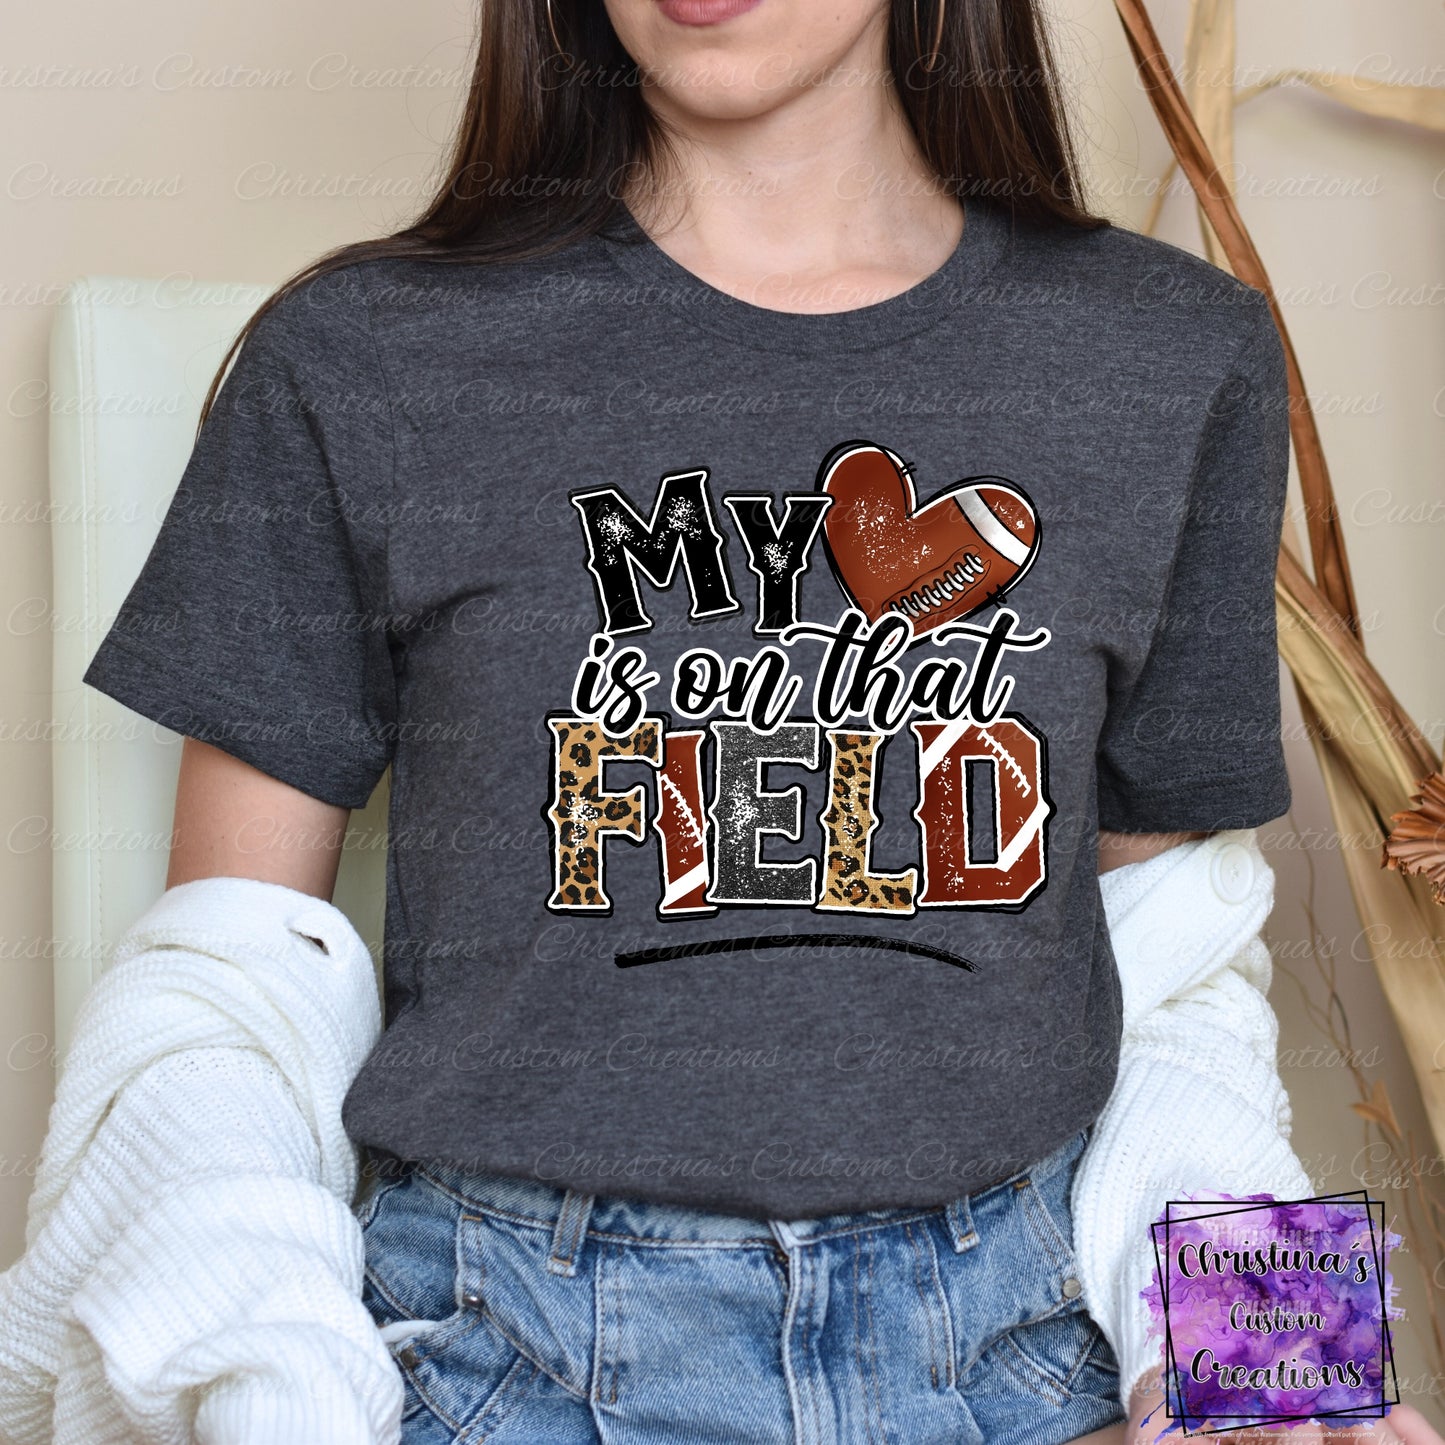 My Heart is on that Field T-Shirt | Trendy Football Shirt | Fast Shipping | Super Soft Shirts for Men/Women/Kid's | Bella Canvas